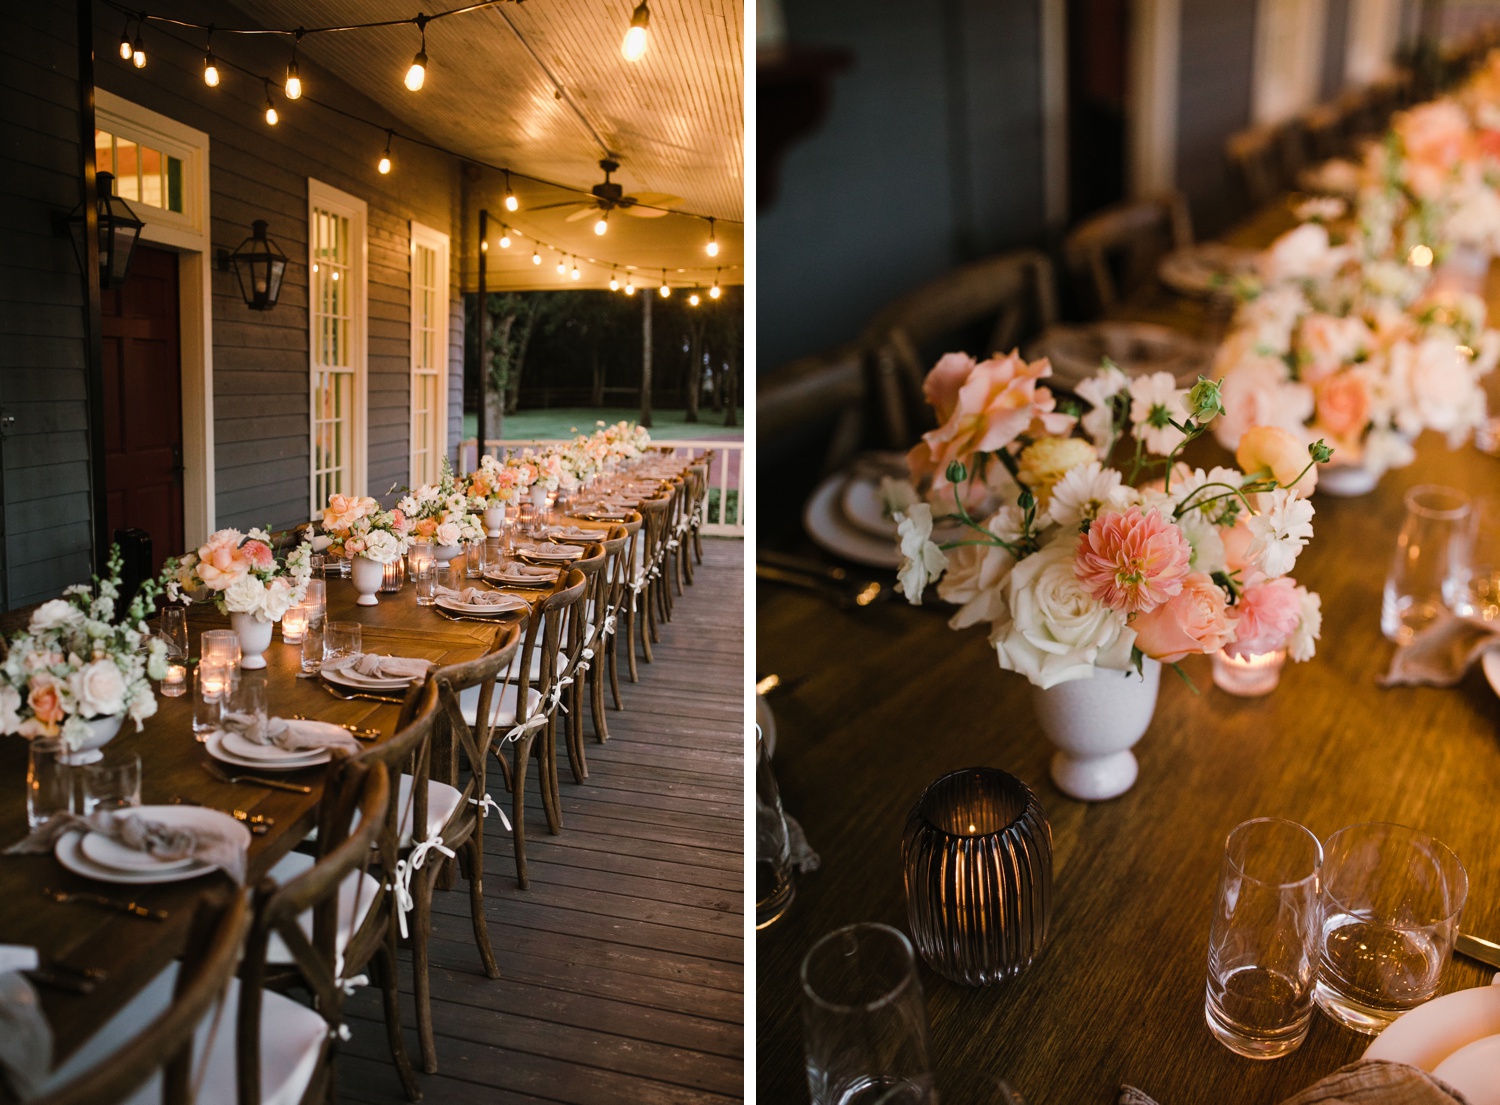 Cafe lights and pink and white flowers for an outdoor sunset wedding reception